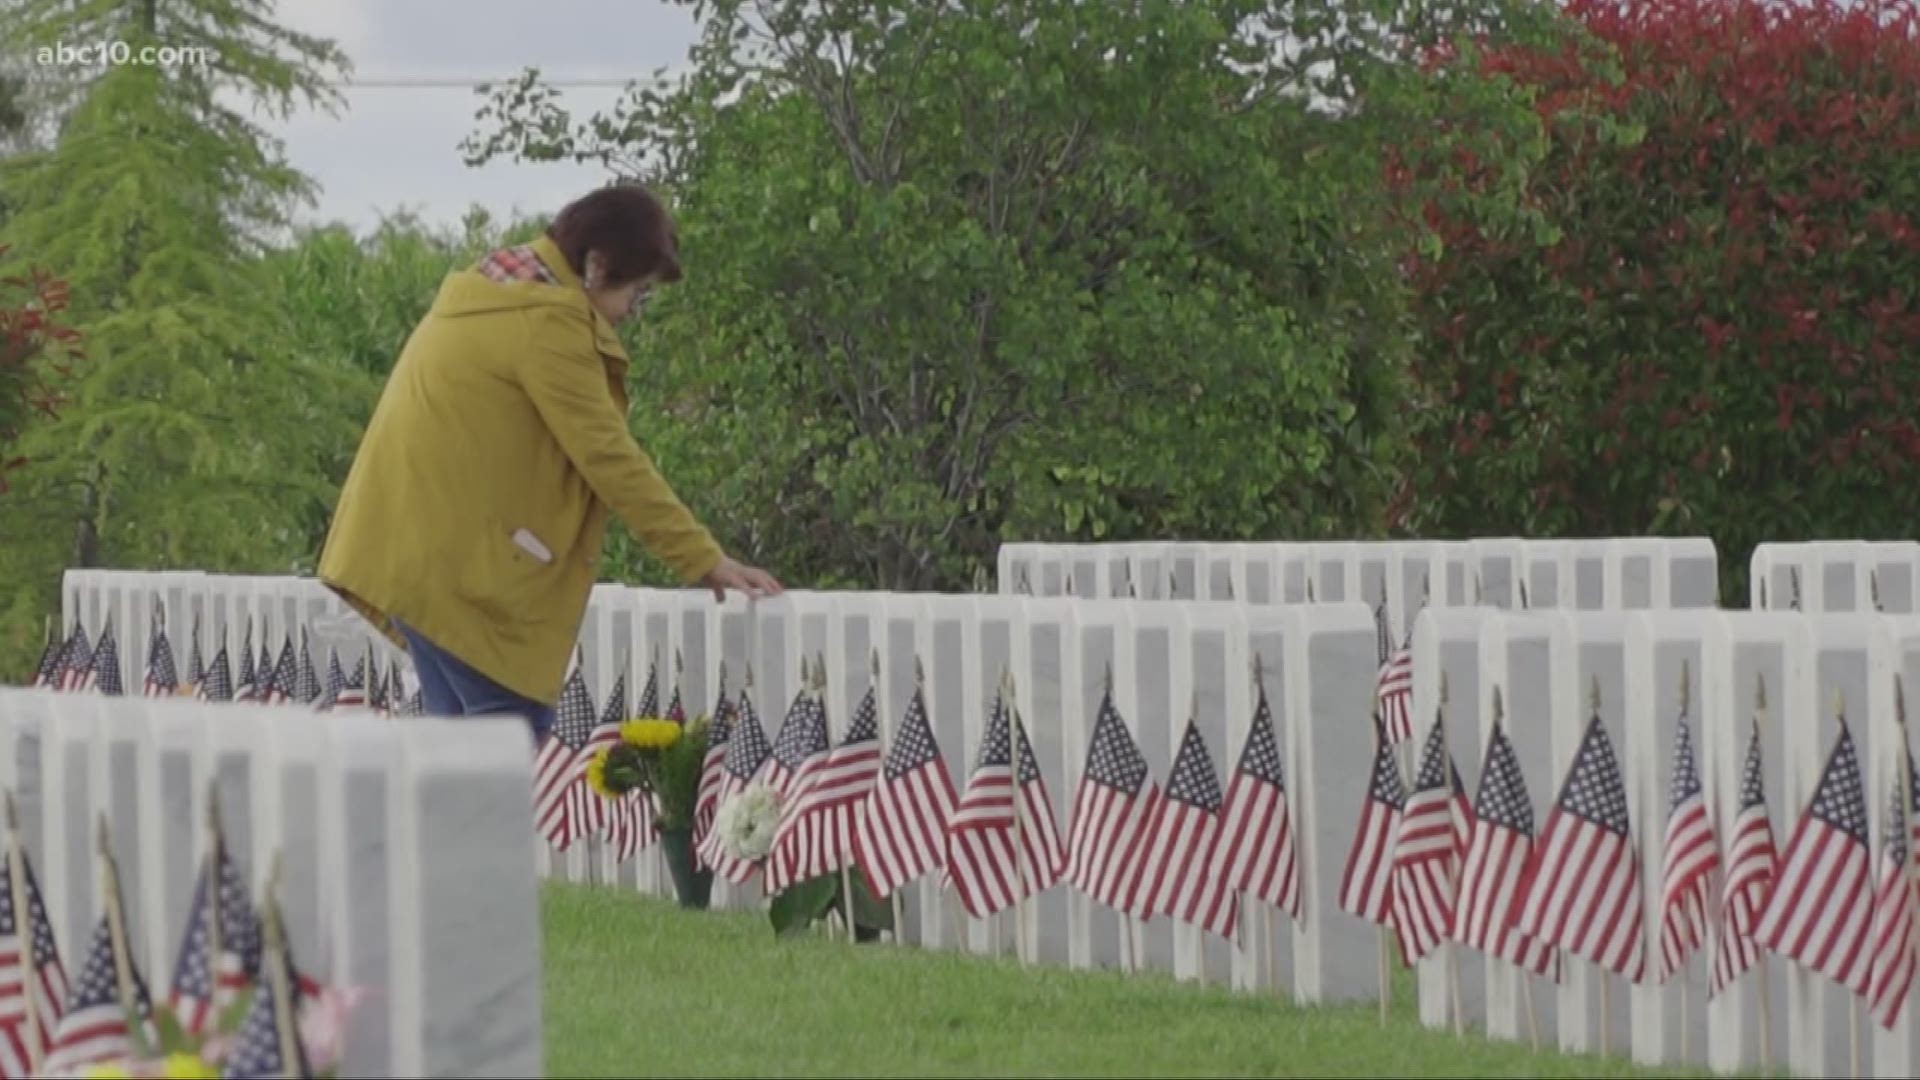 The Sacramento Valley National Cemetery has more than 33,000 flags planted across its property, one for every headstone.